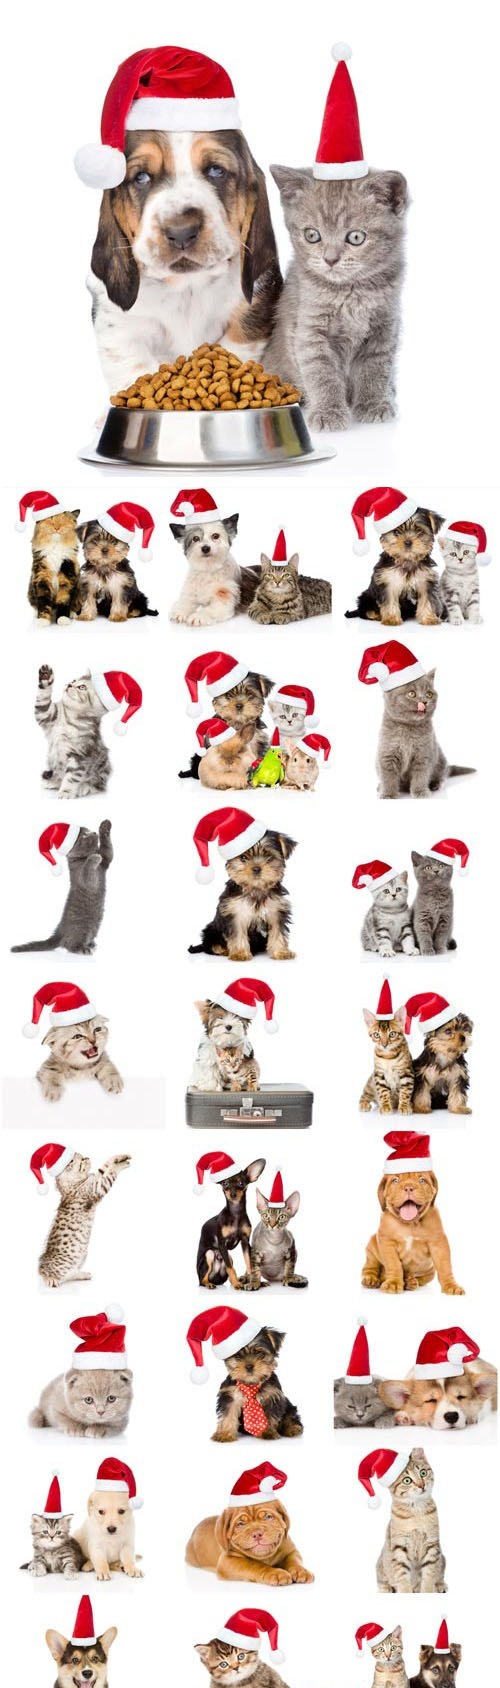 New Year and Christmas stock photos - 52